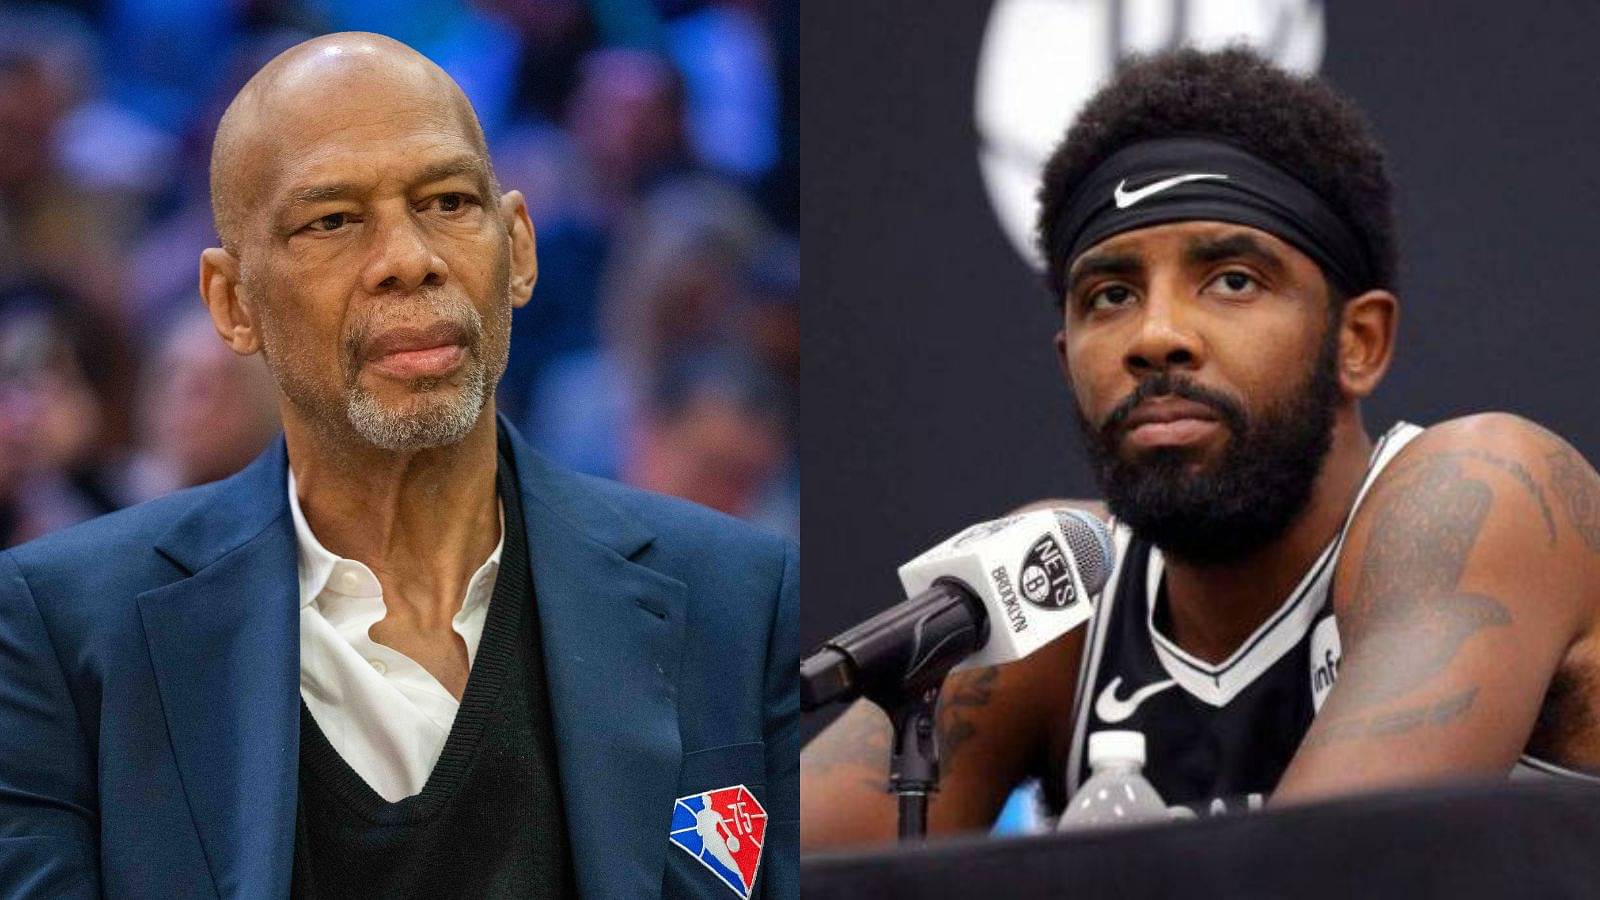 “Kyrie Irving is a Comical Baffoon”: Kareem Abdul-Jabbar Tharshes Nets Star For Sharing an Alex Jones Clip, Urges Nike to Pull Their Contract